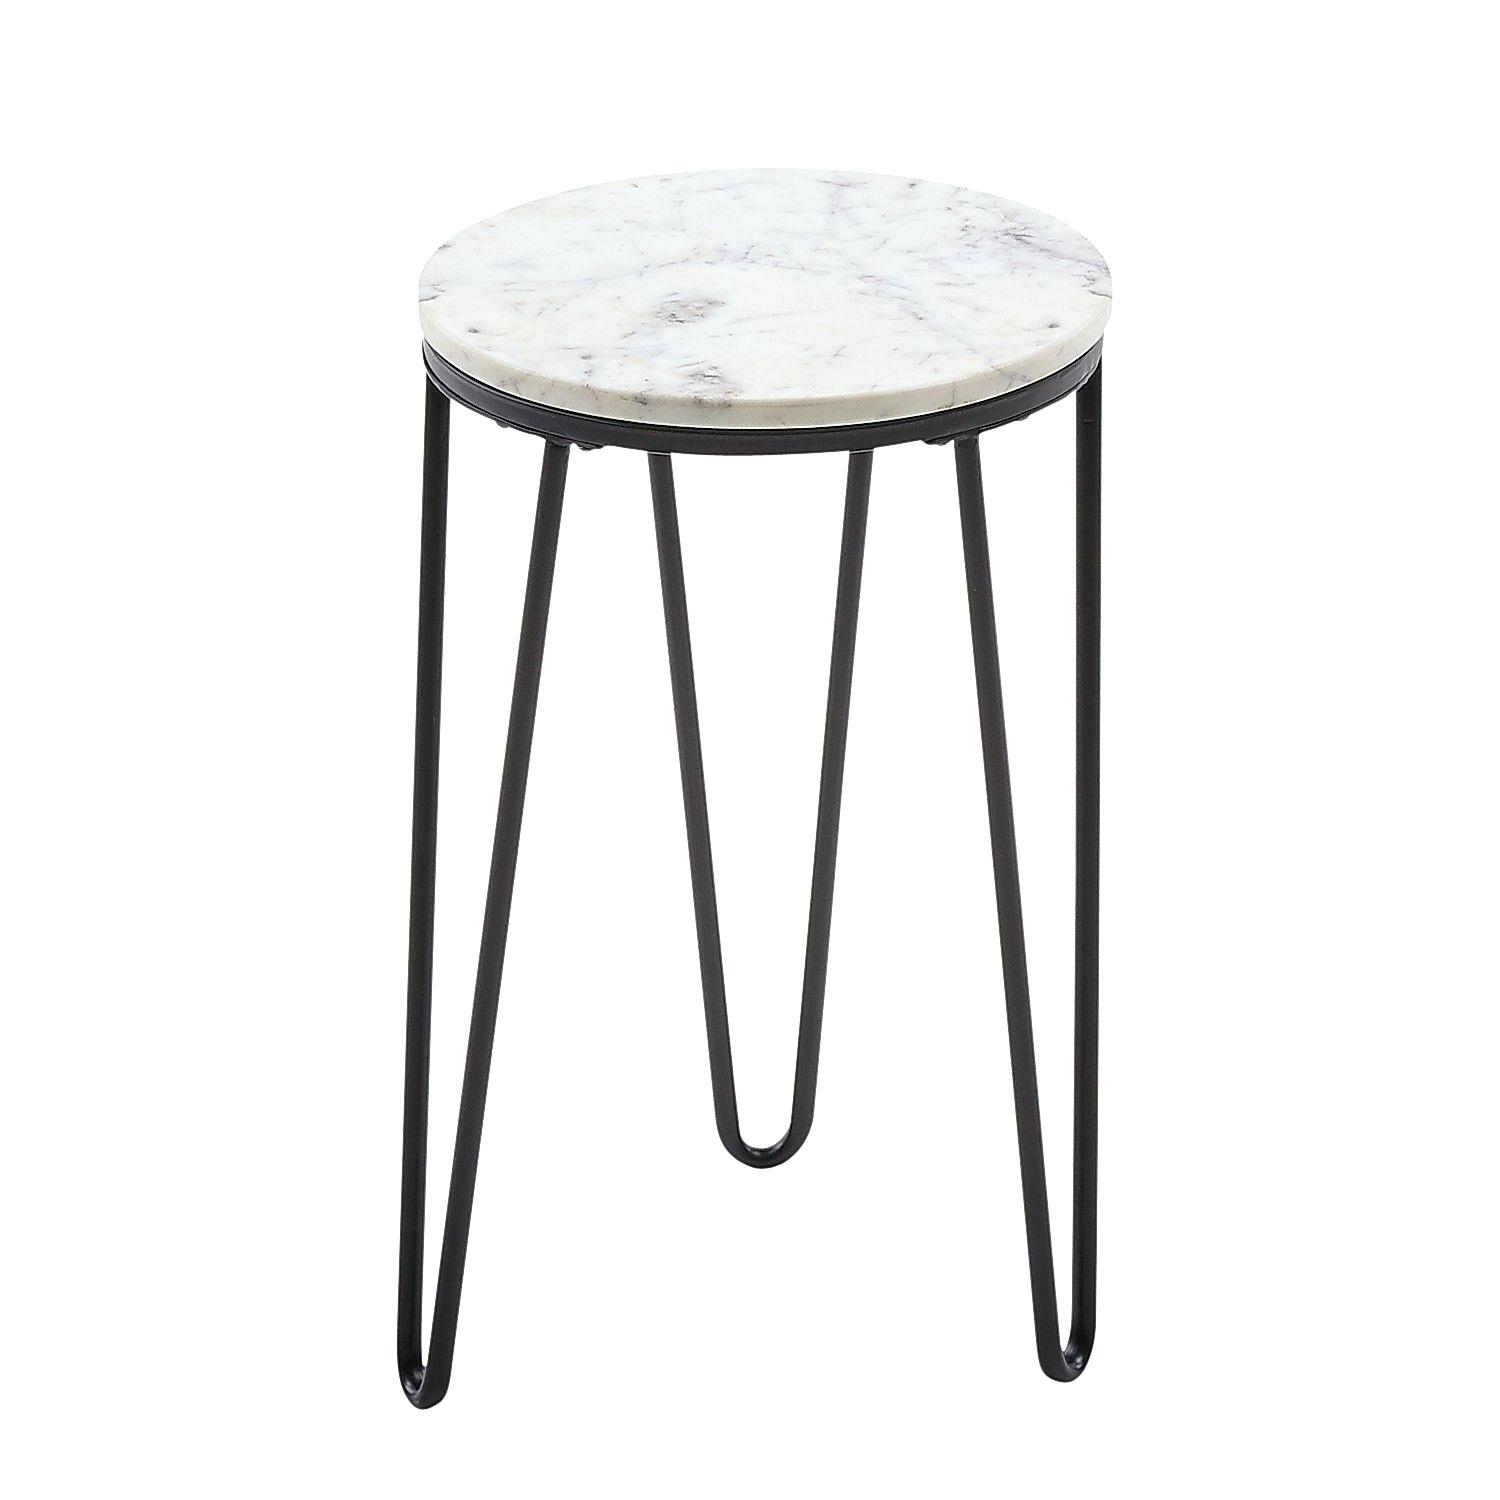 mosaic accent table patio coffee clean outdoor pier tables elba save this item kenzie tall end reproduction designer furniture target kitchen two door cabinet black and white